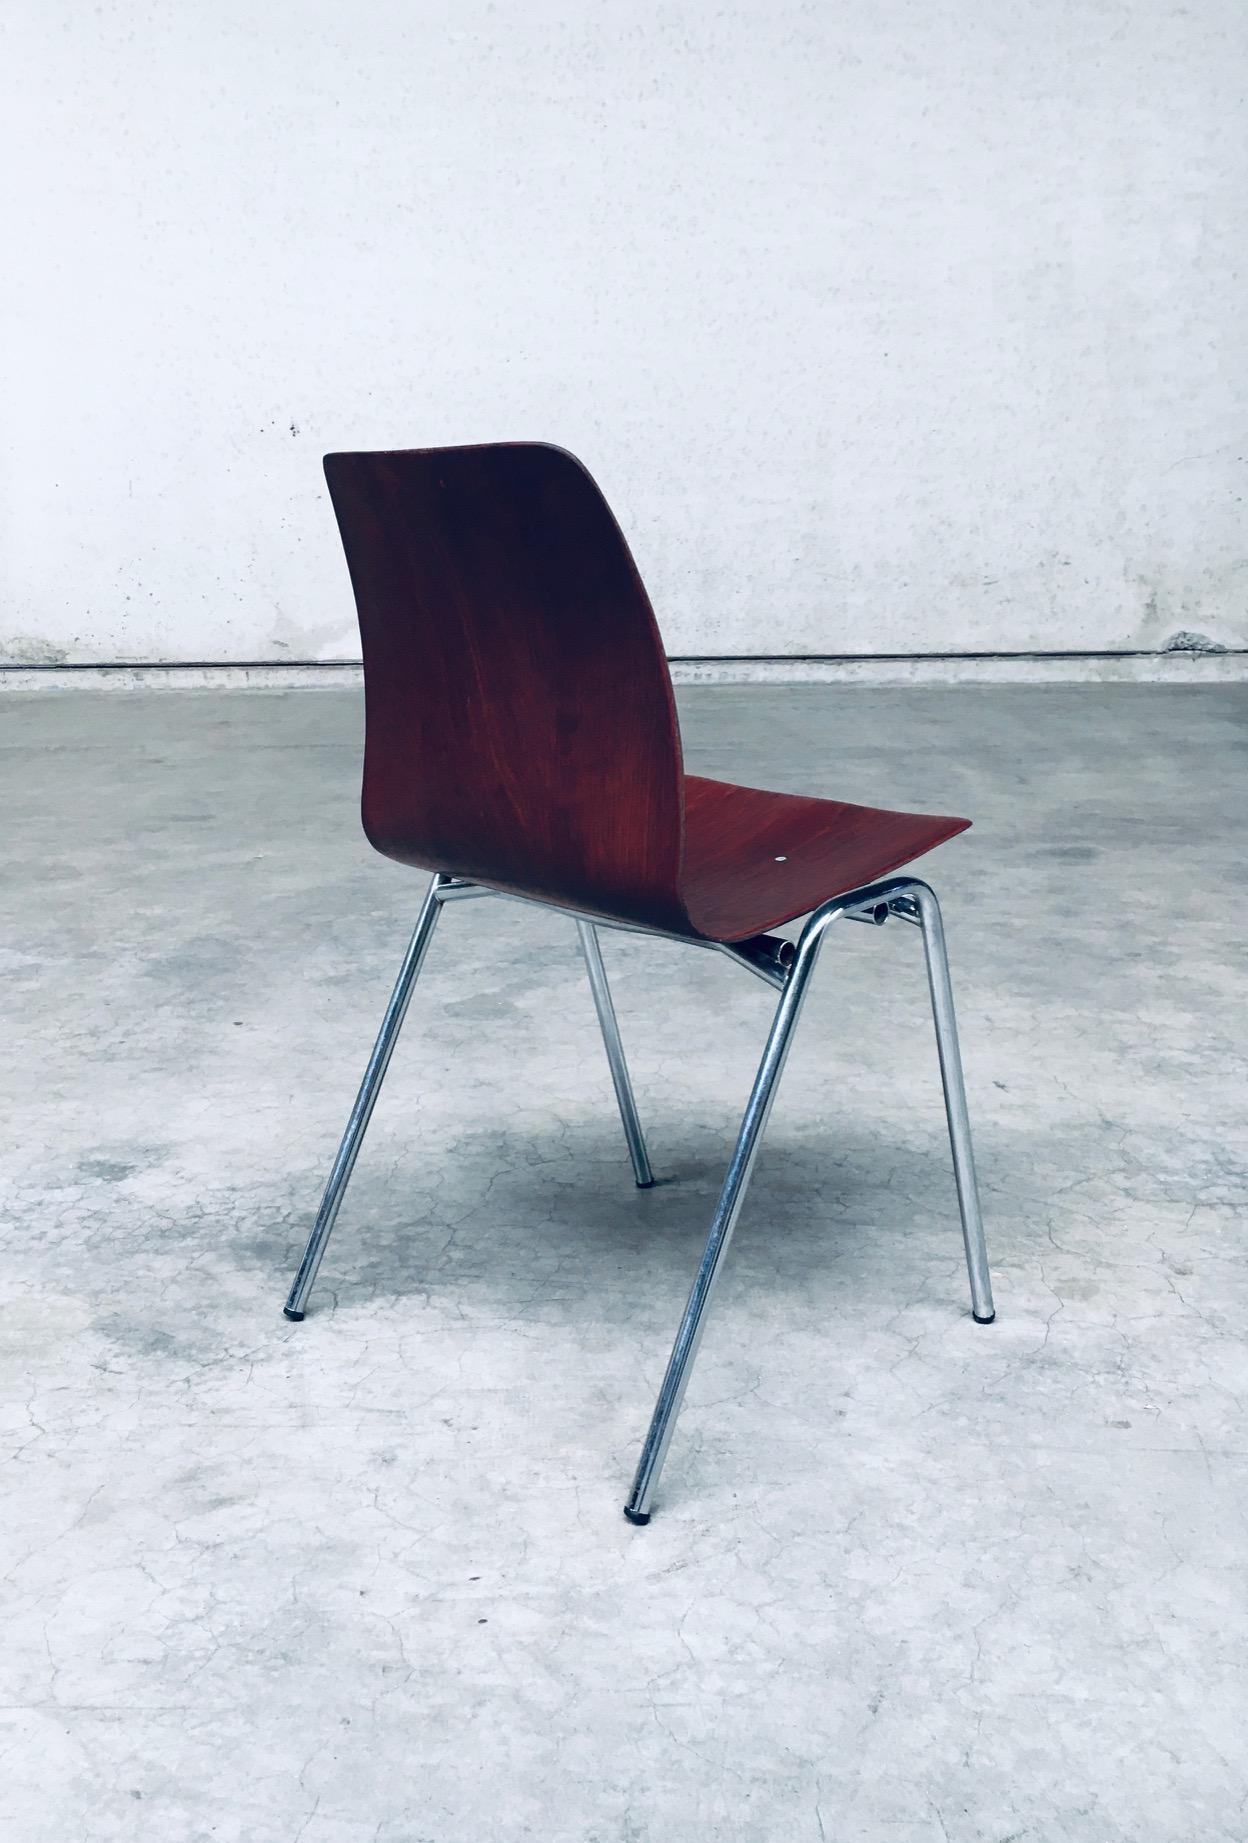 Midcentury Design Stacking Chairs by Elmar Flötotto for Pagholz, 1960's Germany For Sale 3